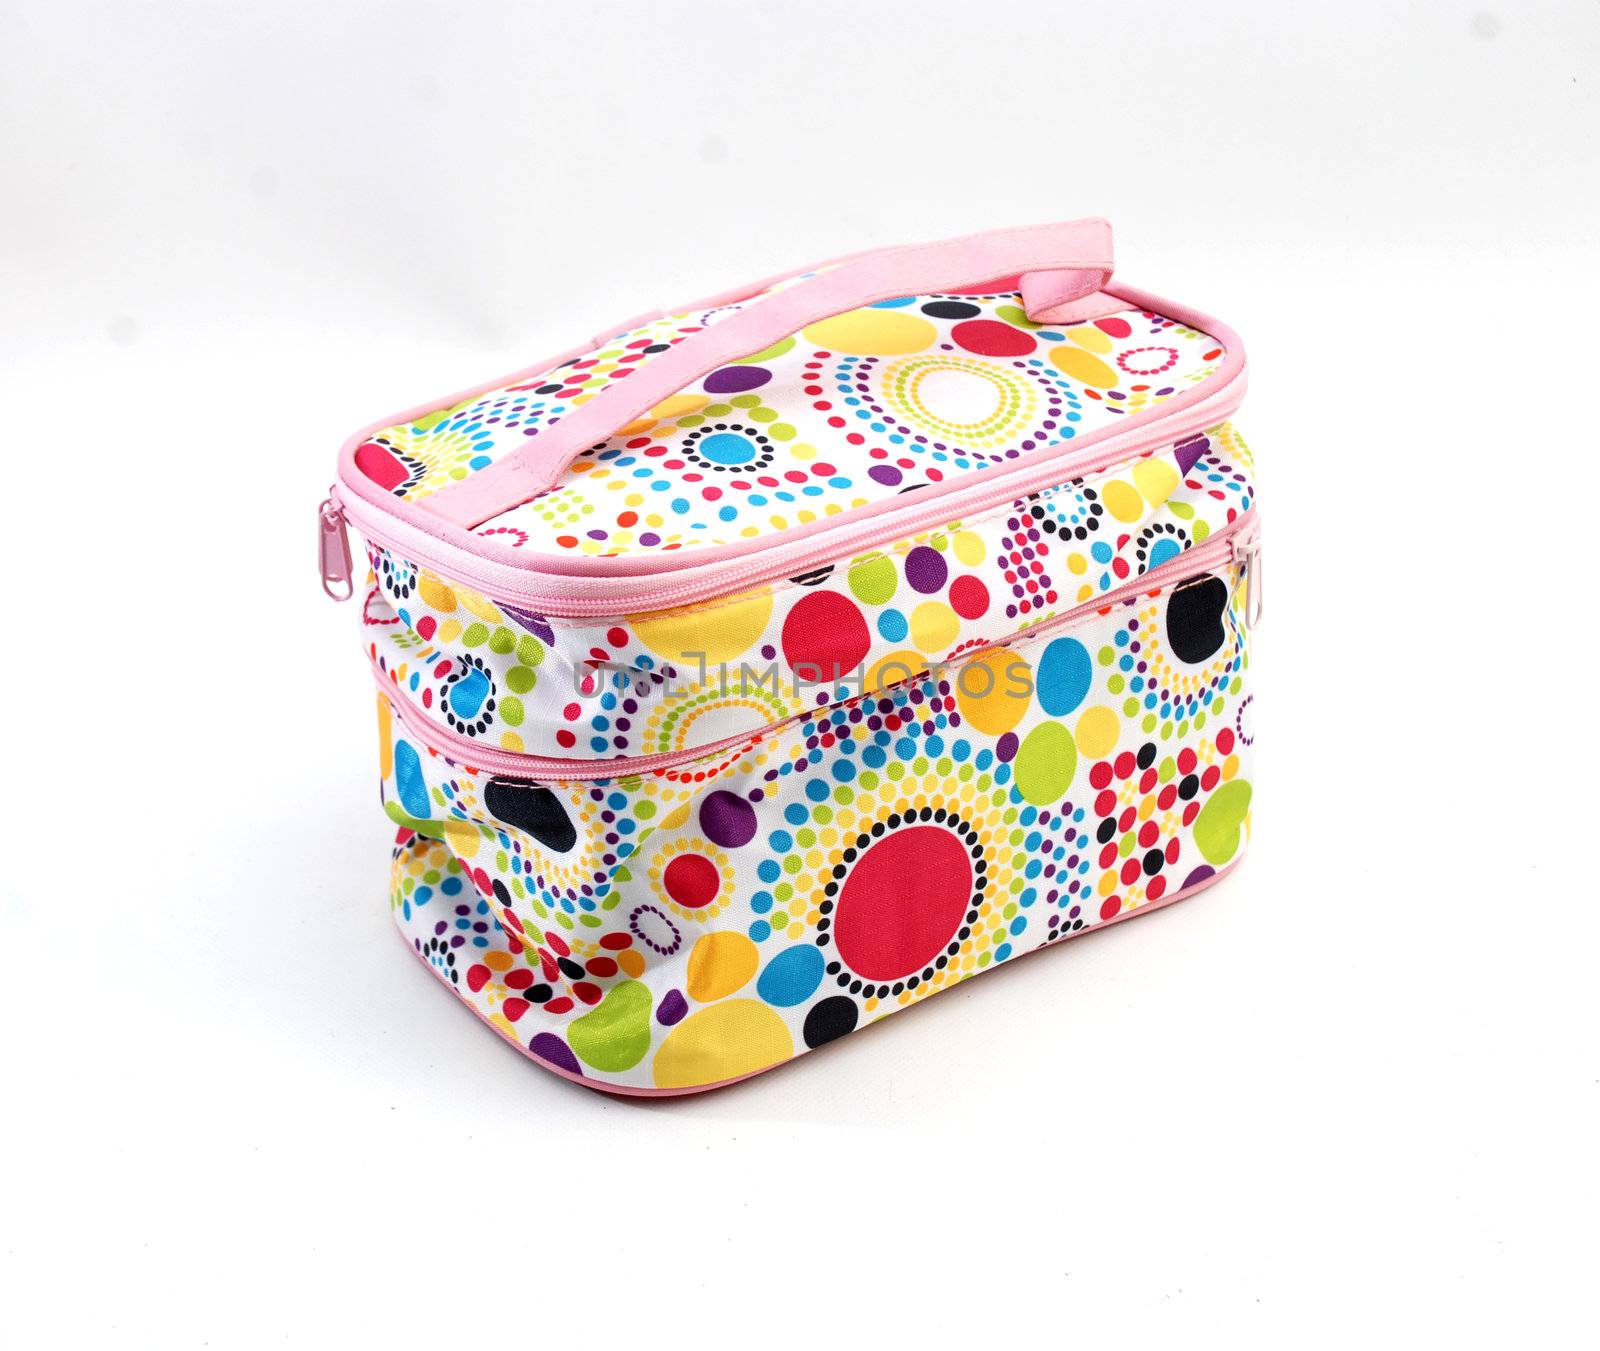 Colorful toiletry bag